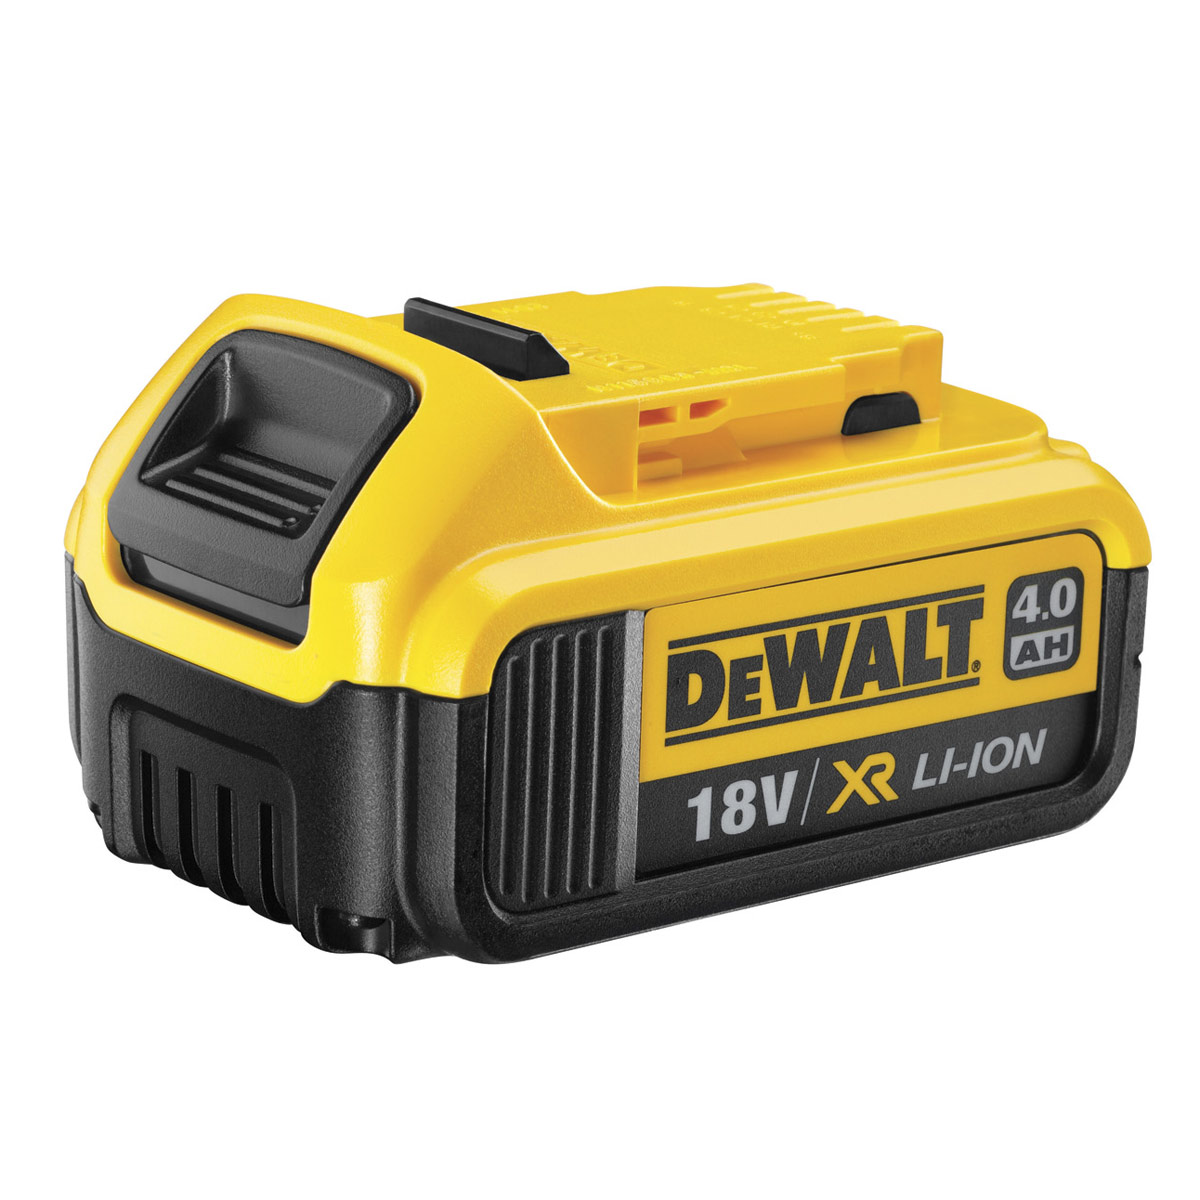 DEWALT DCB182 18V 4.0AH XR LITHIUM ION BATTERY PACK WITH CHARGE INDICATOR